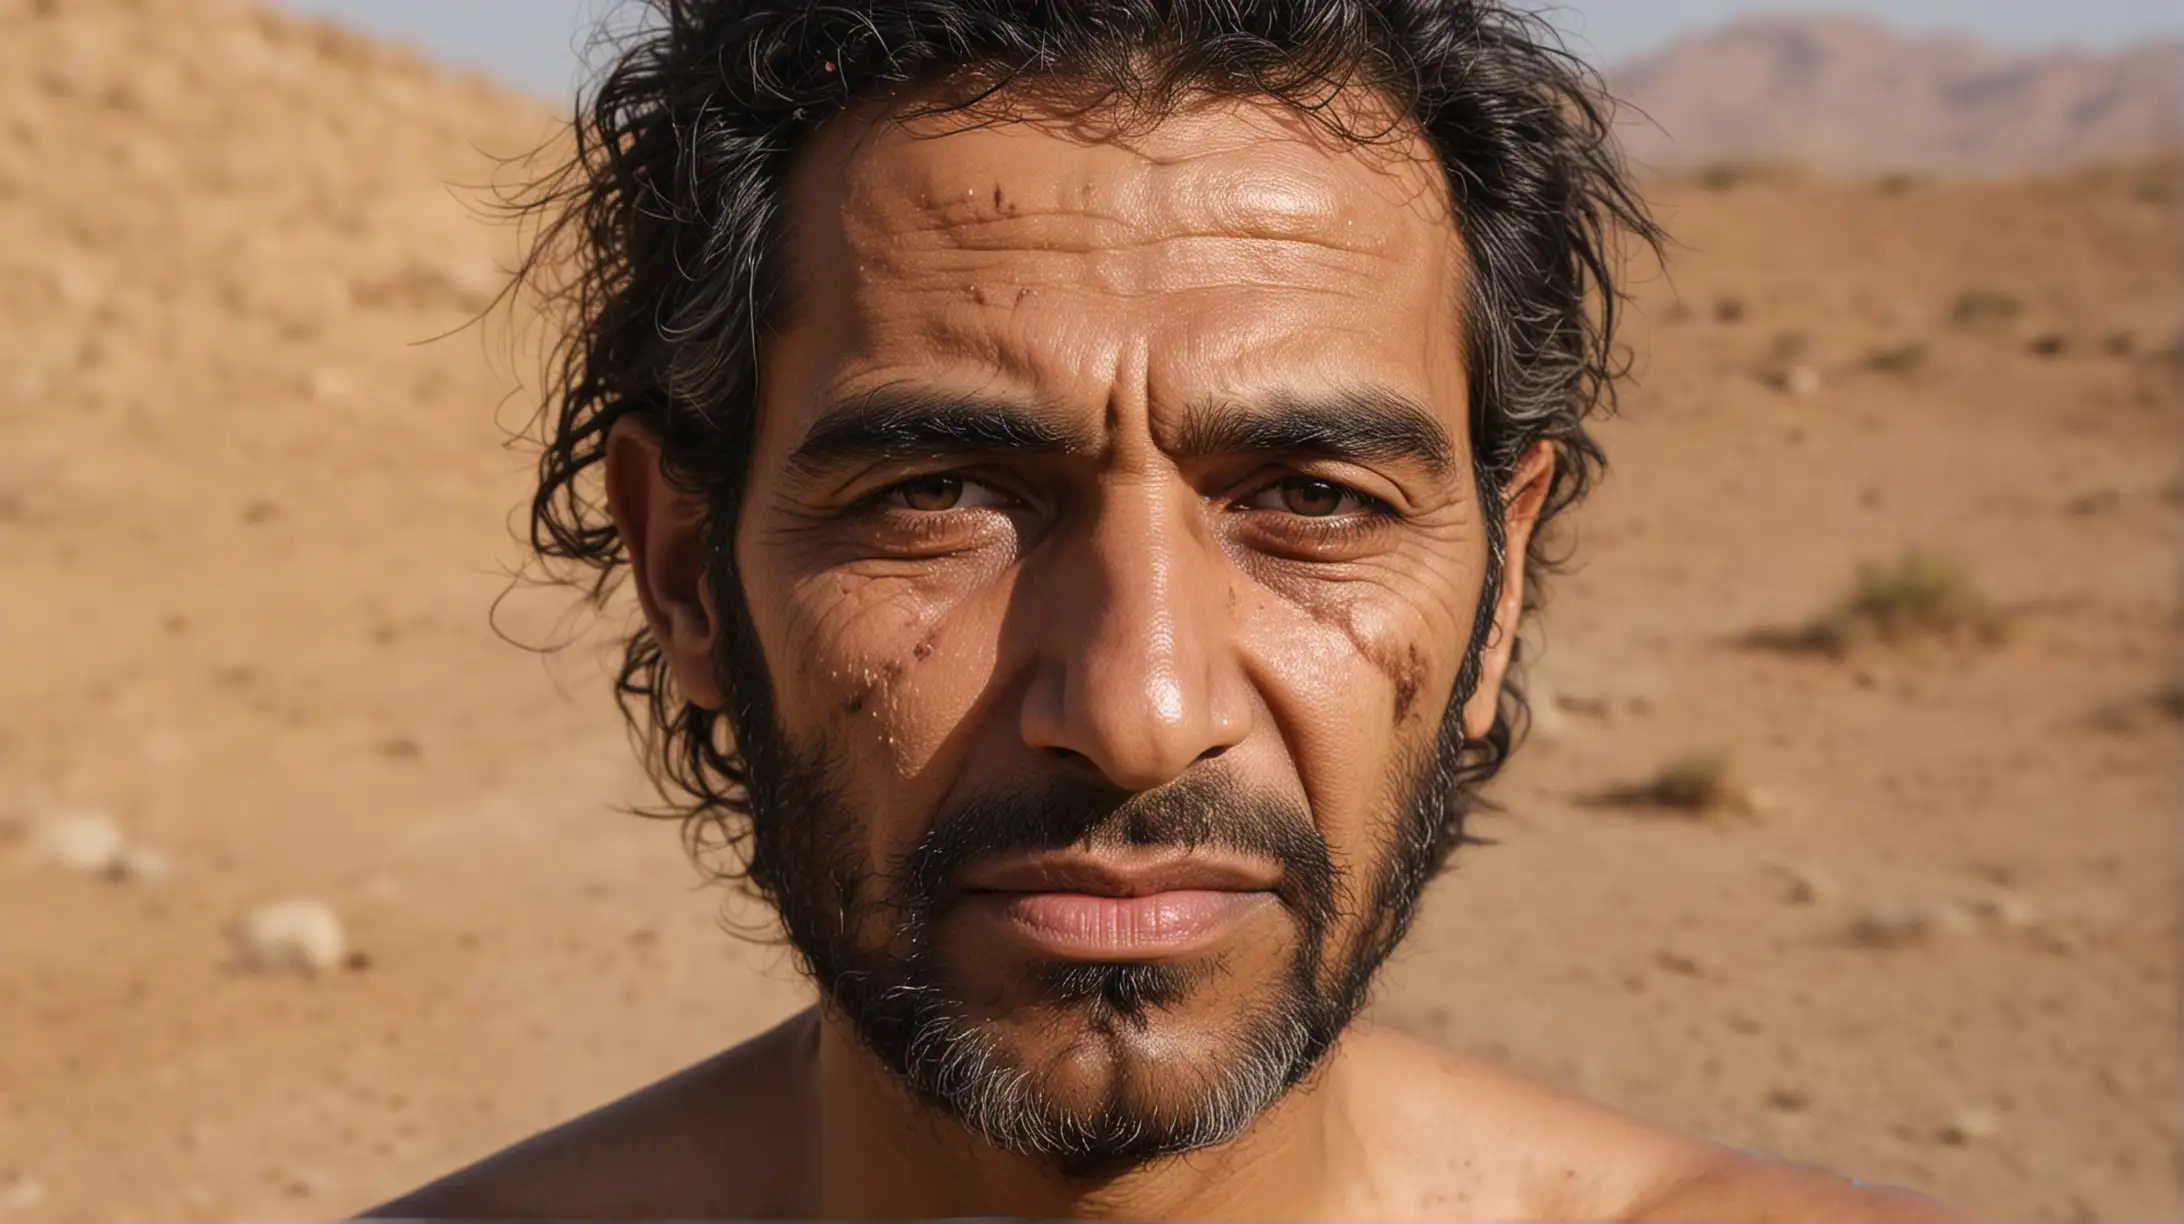 Middle Eastern Man with Skin Problems in Biblical Desert Setting